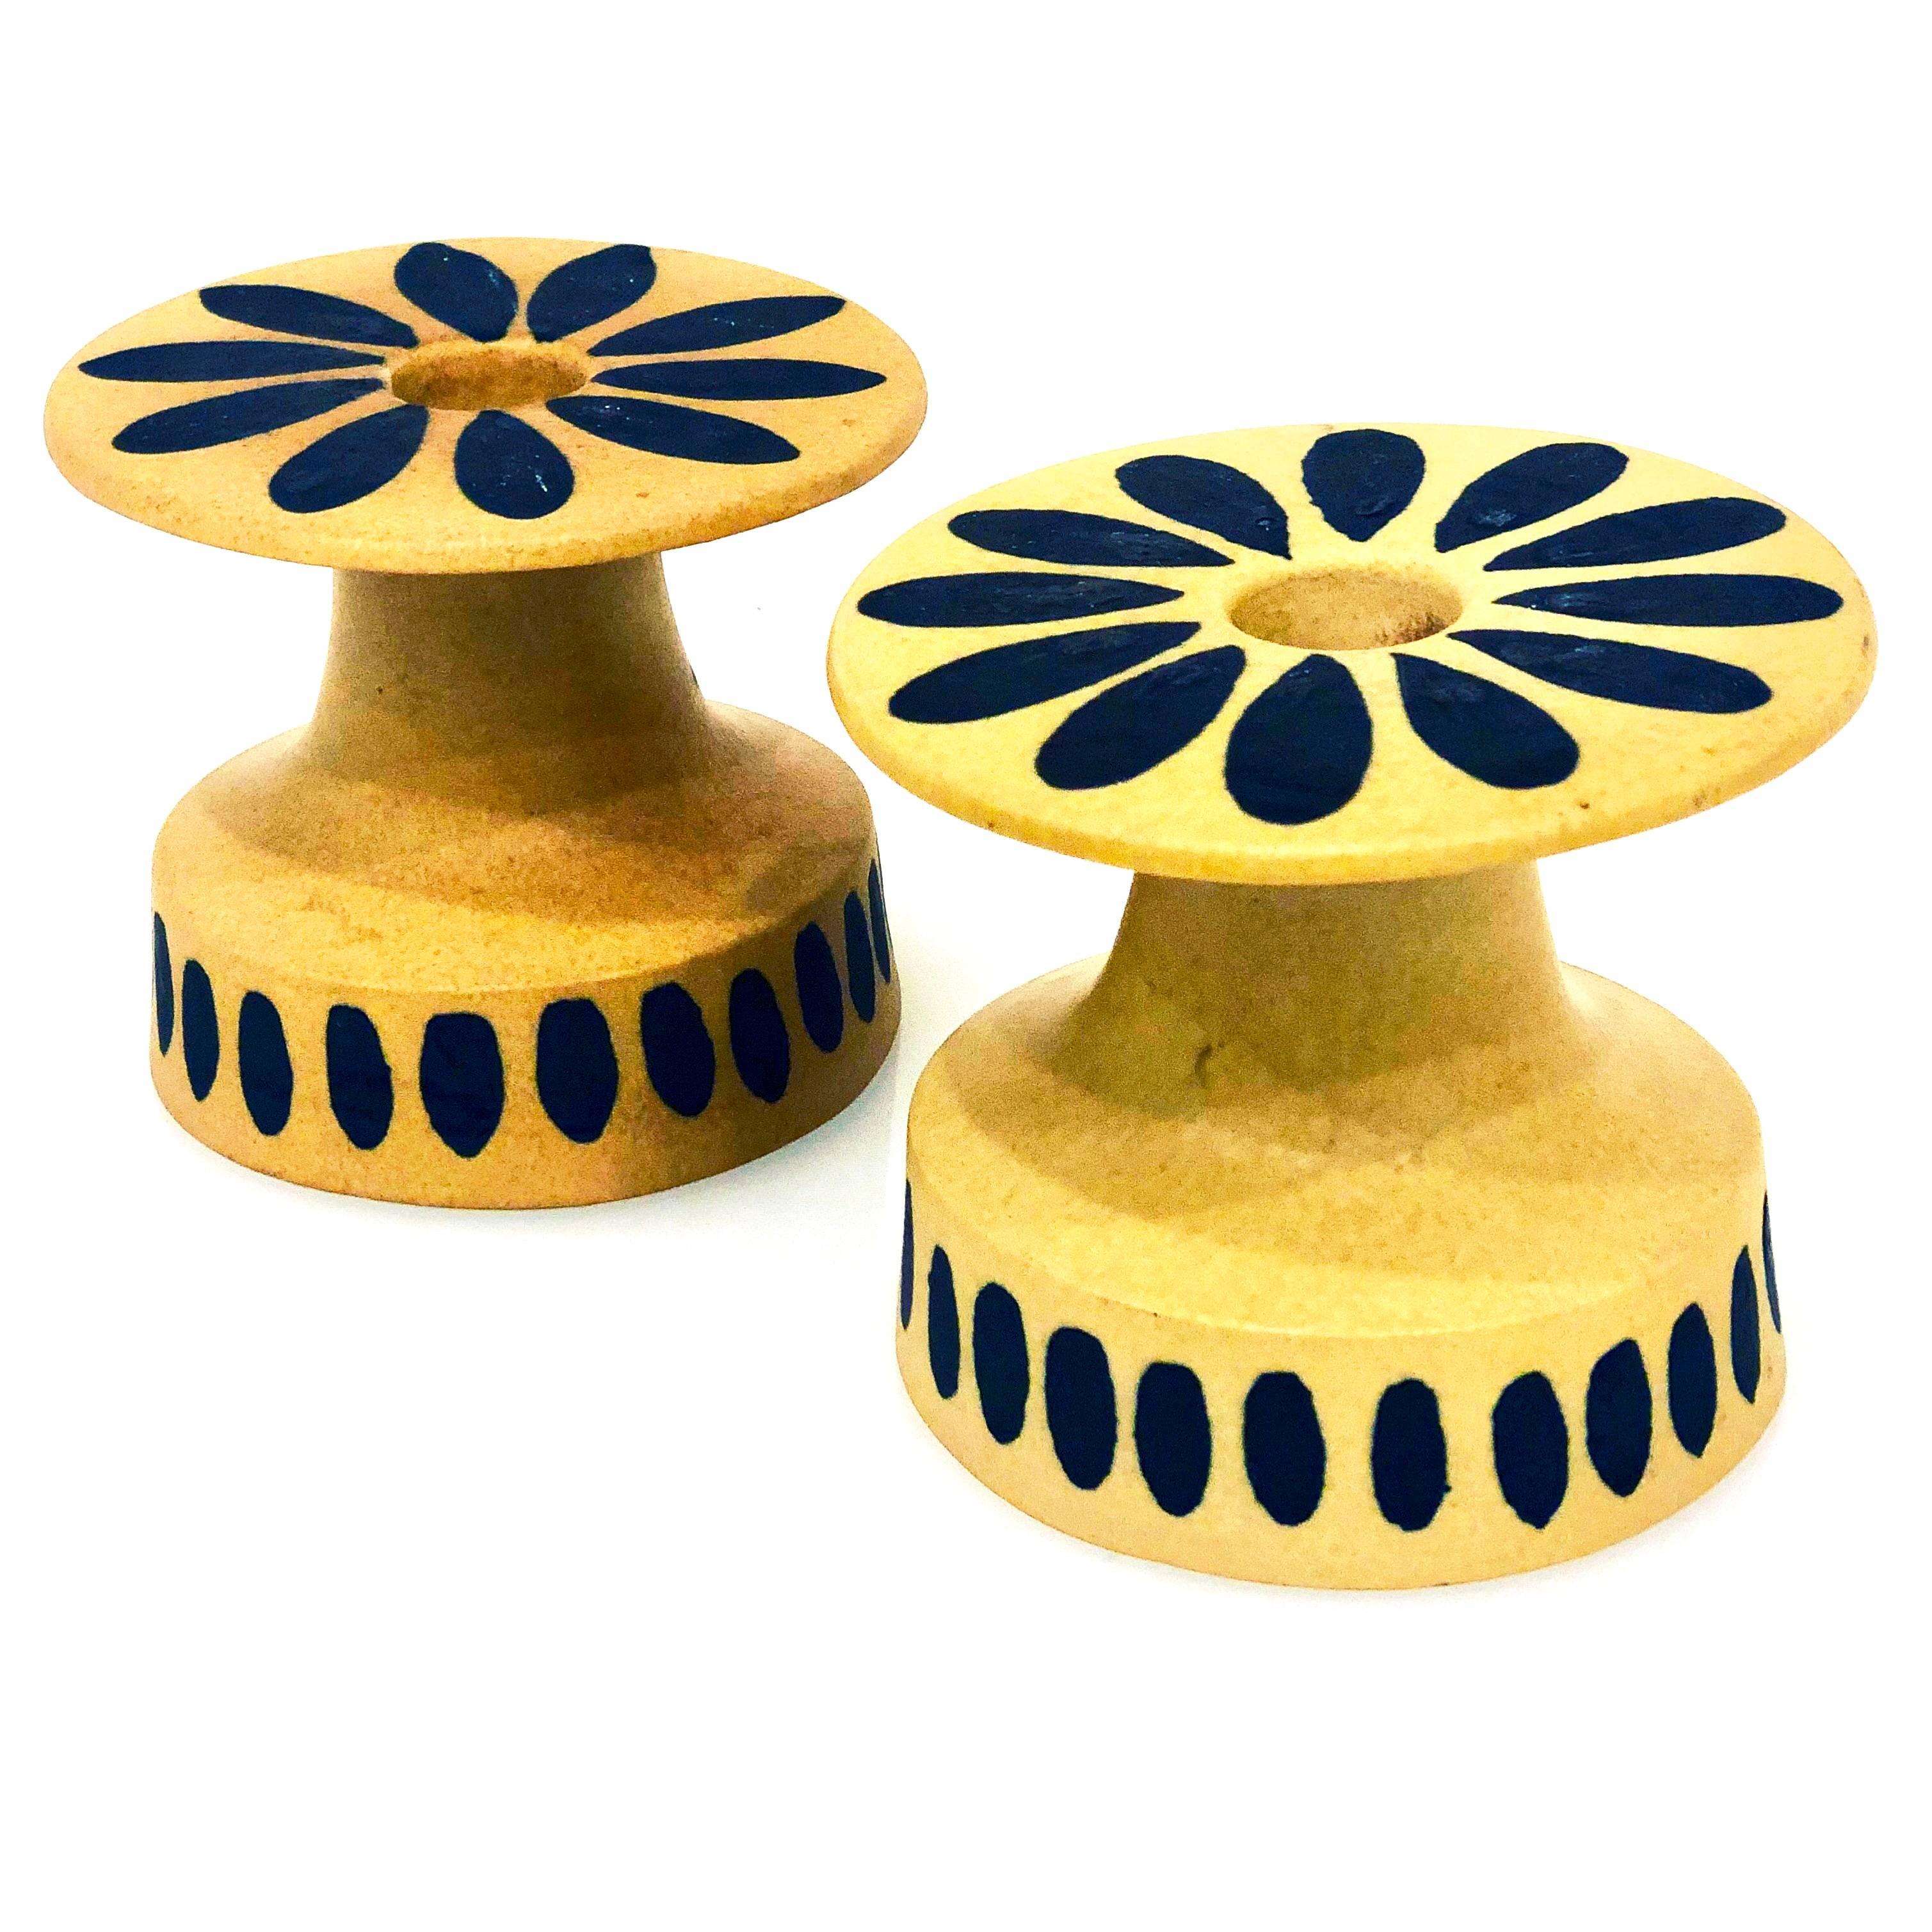 American Pair of Midcentury Ceramic Candlestick Holders by Bennington Potters For Sale